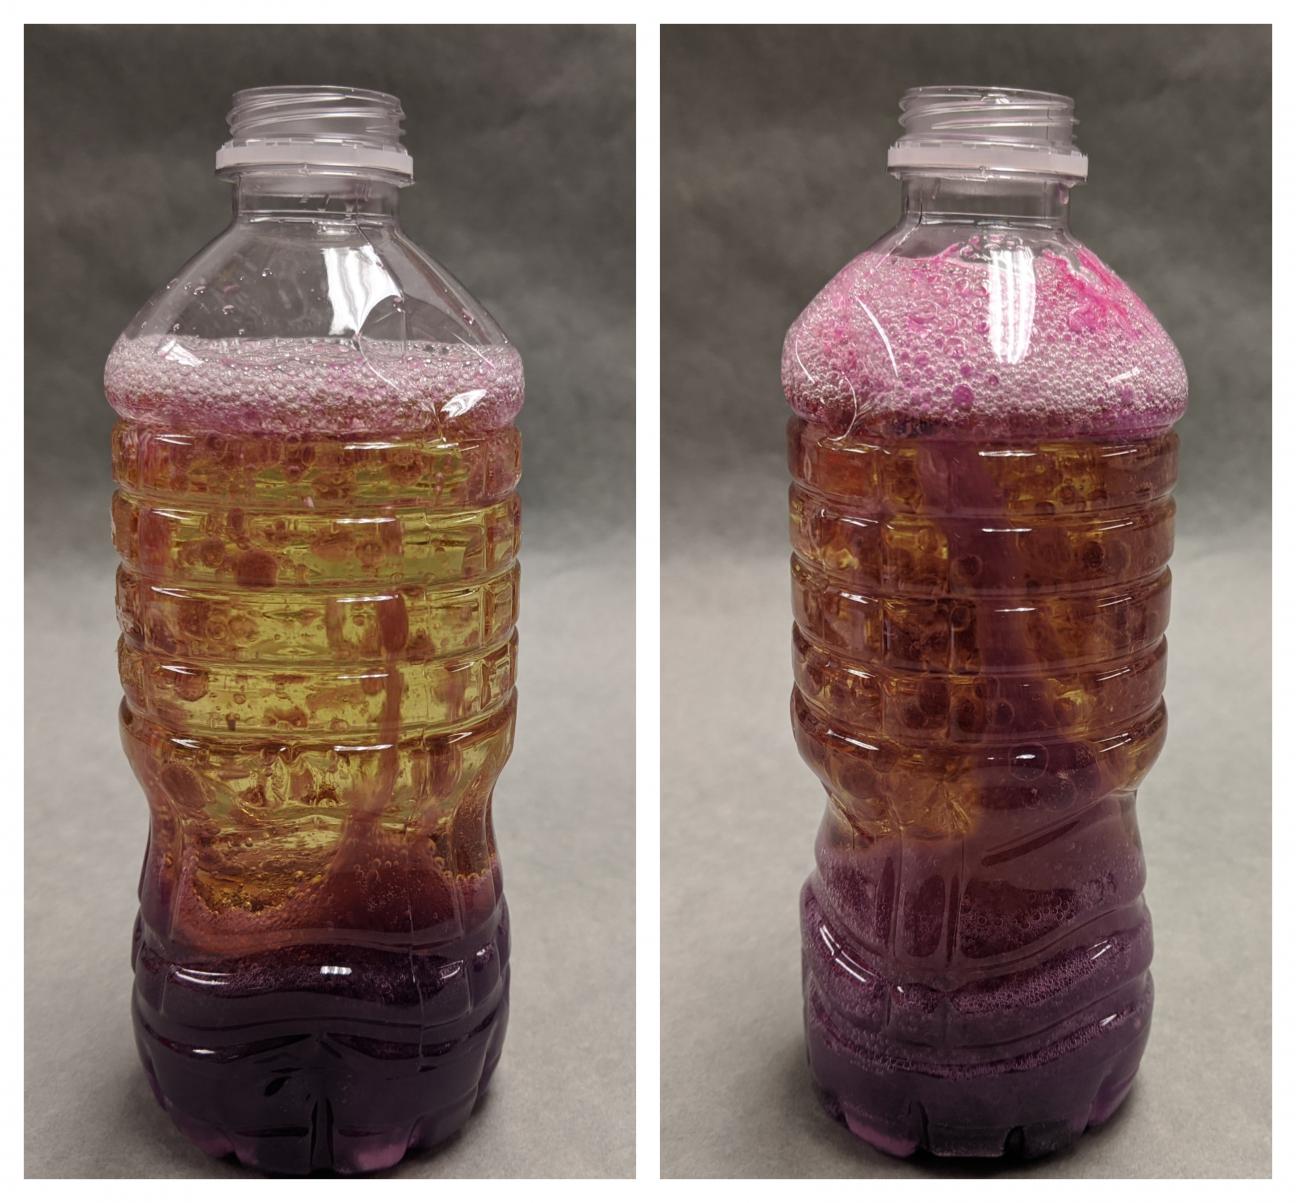 2 photos of DIY lava lamps, with the alka-seltzer tablet reacting with the water.